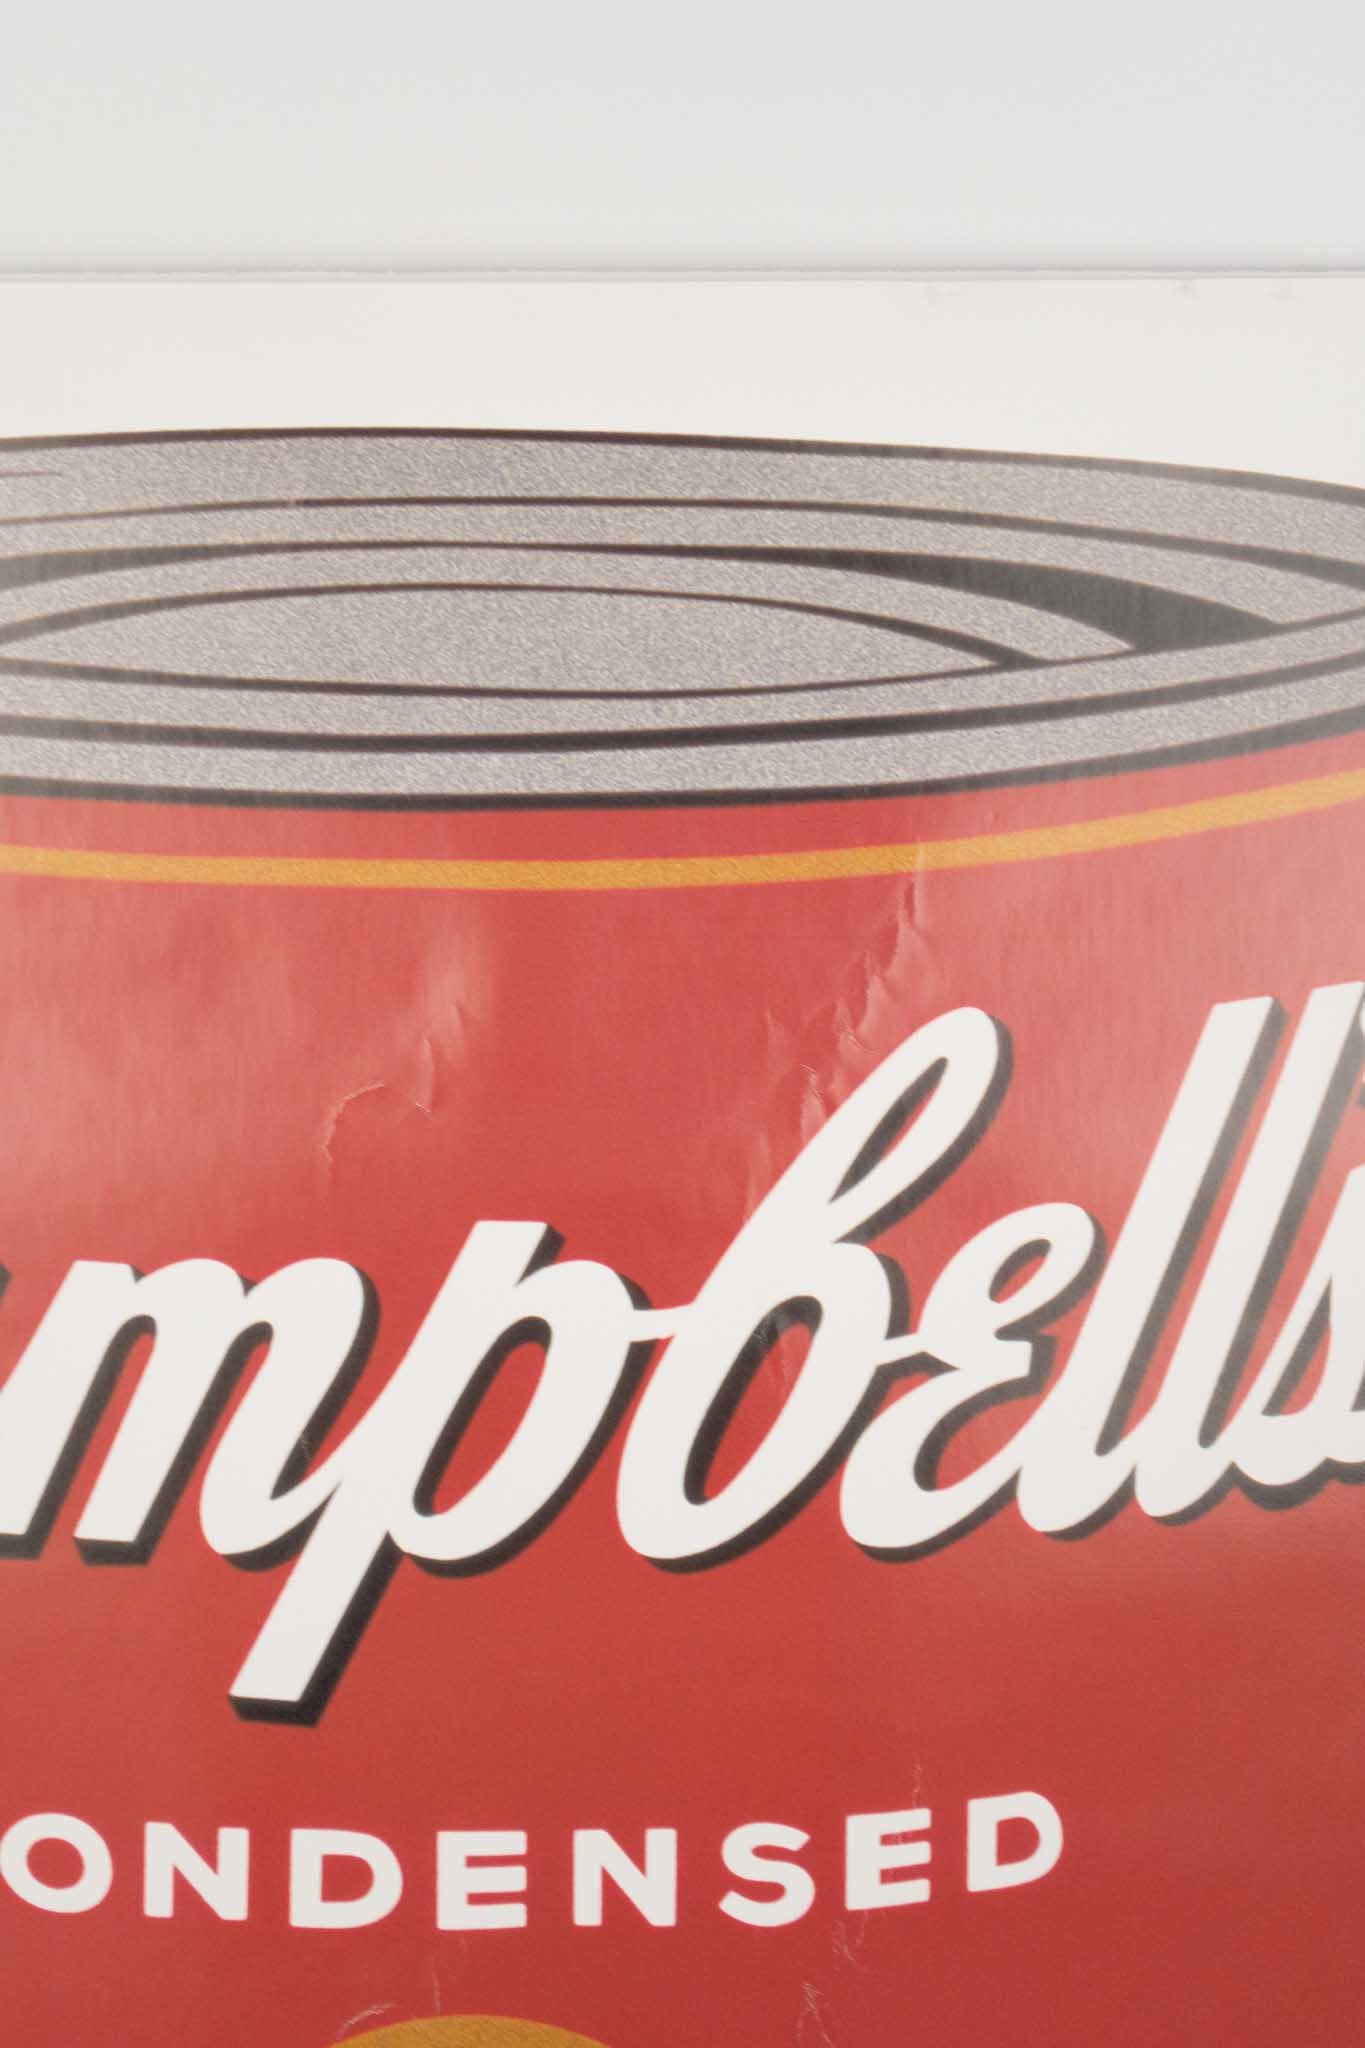 Andy Warhol "Campbell's Soup Can" Print